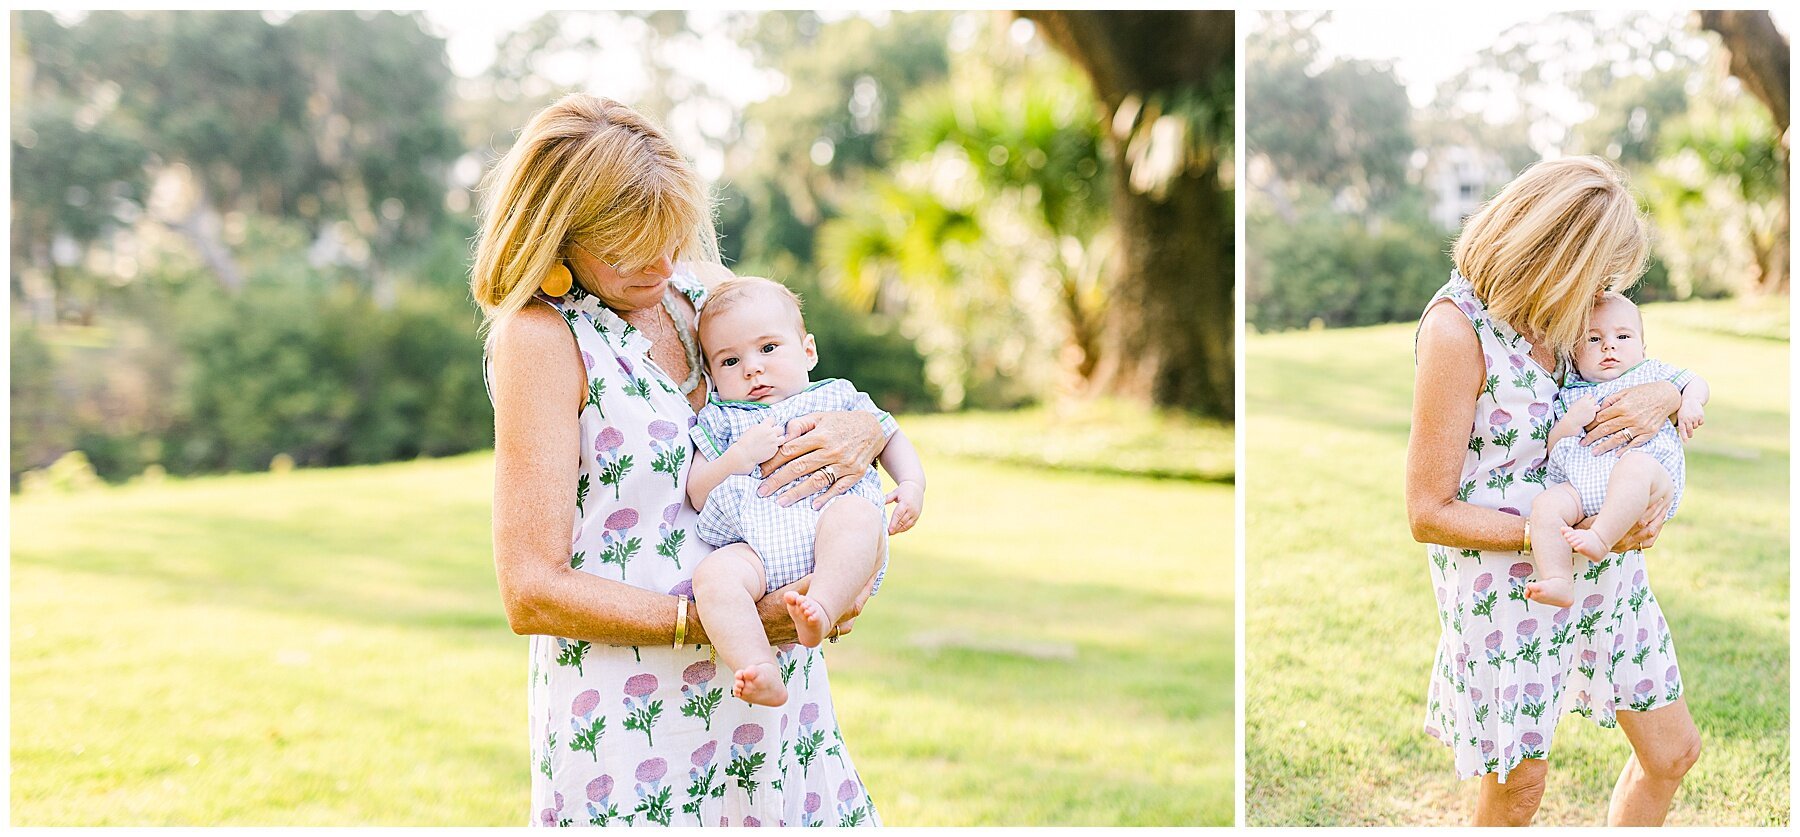 Katherine_Ives_Photography_Montage_Palmetto_Bluff_Oden_Family_19.jpg